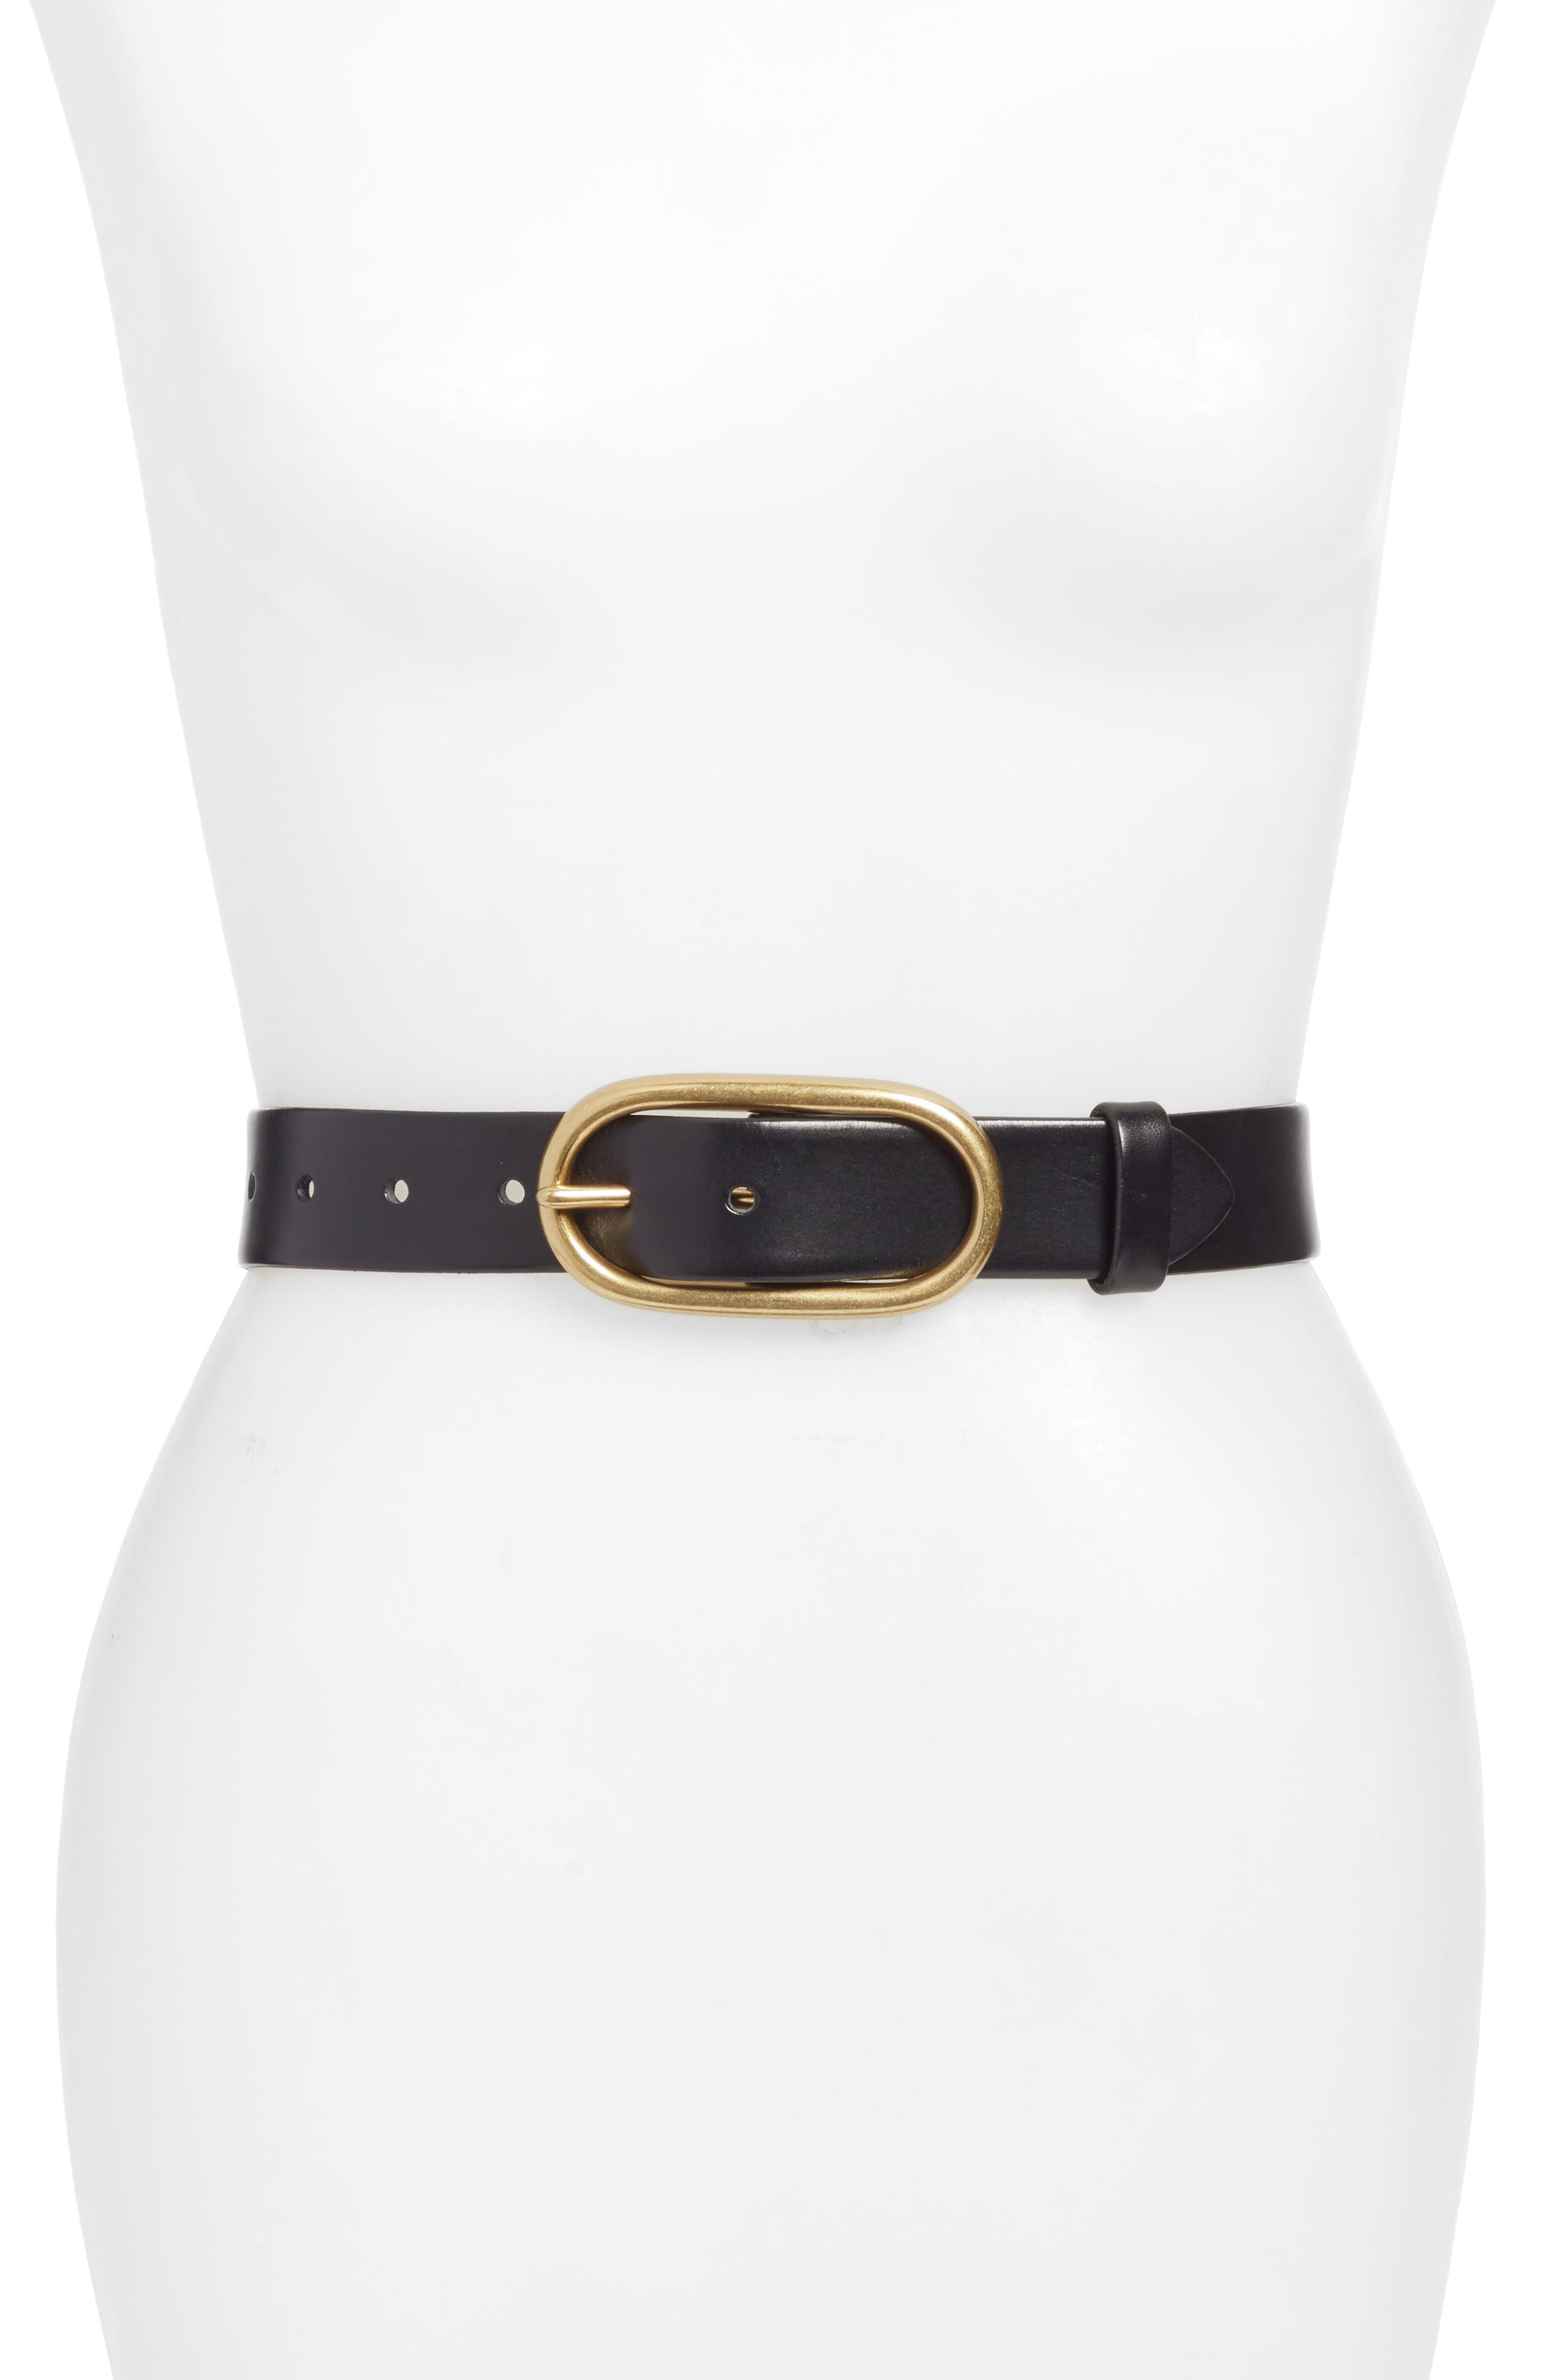 Essentials Women/'s Casual Skinny Jean Belt with Single Prong Buckle